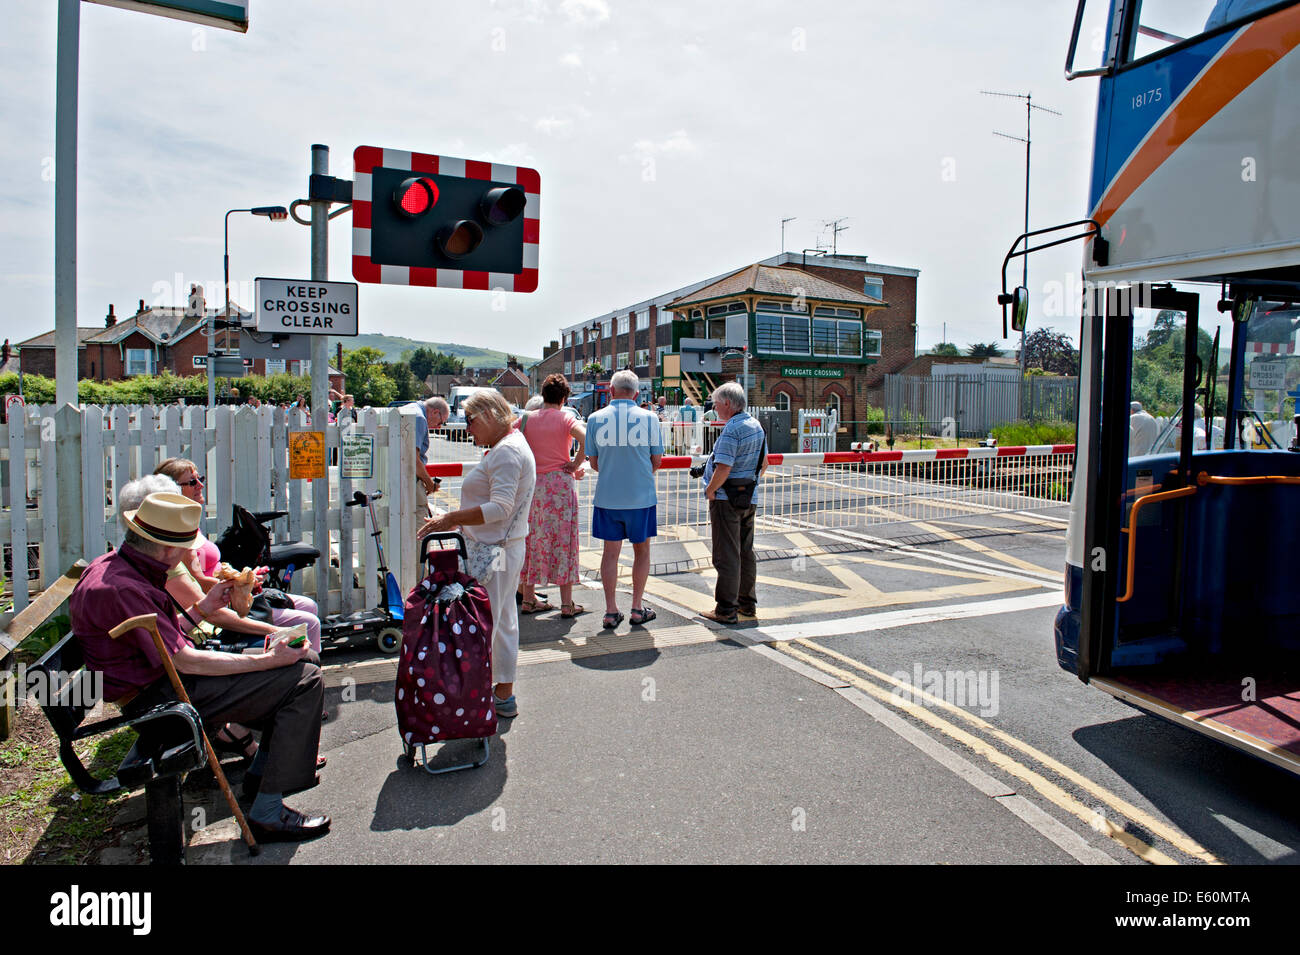 Pedestrians and traffic wait at the railway crossing at Polegate Sussex. UK Stock Photo